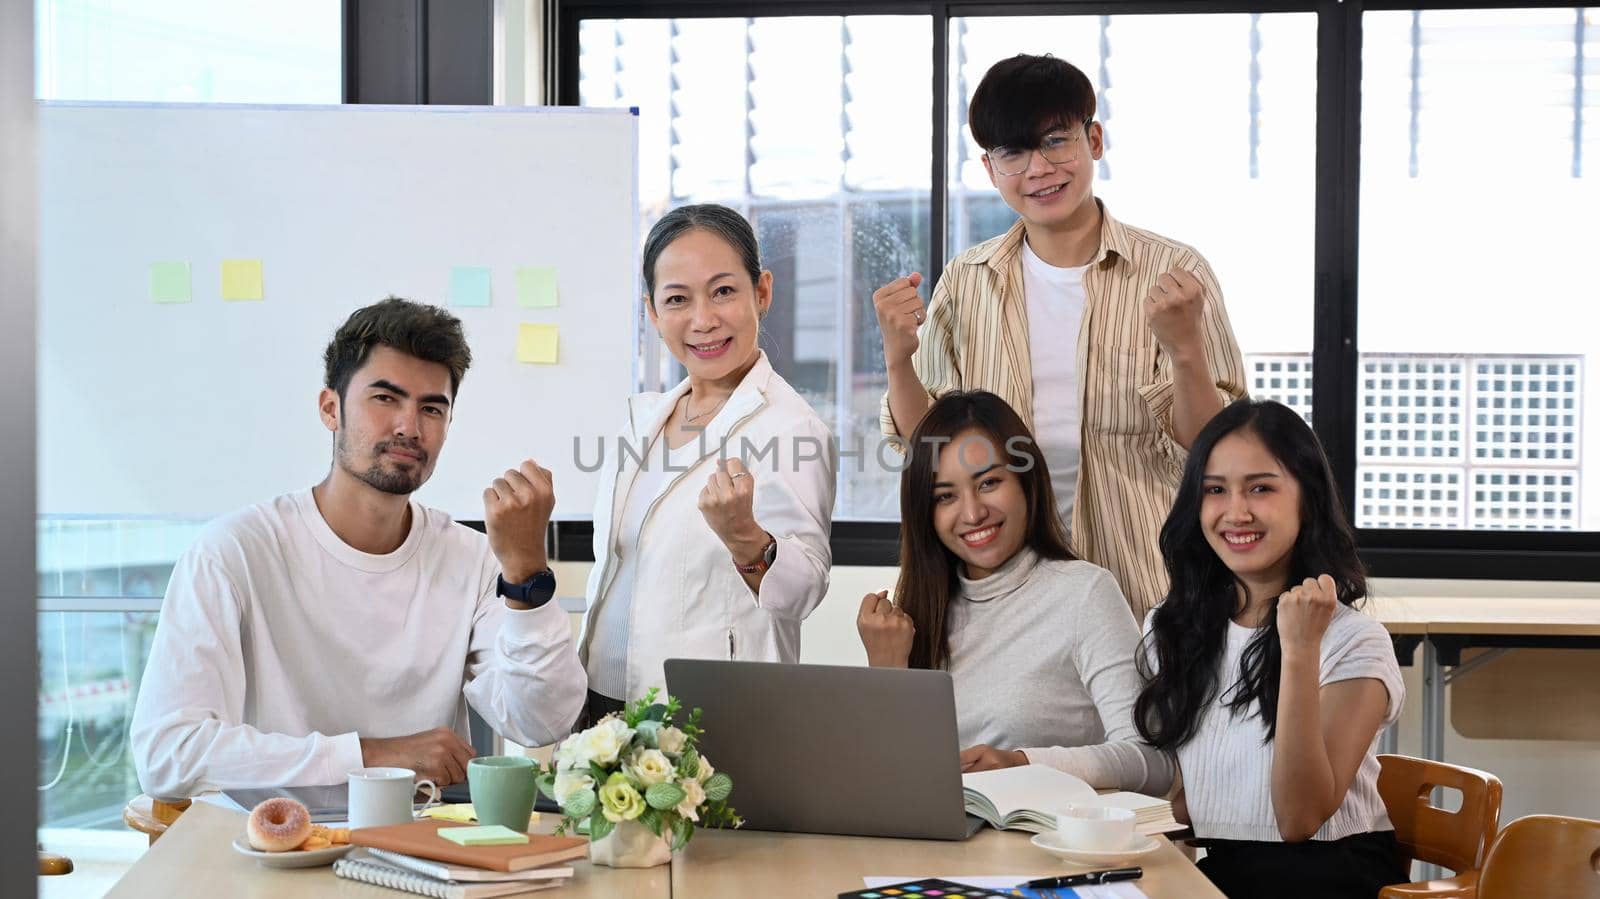 Successful mature businesswoman and team cheering with clenched fist, celebrating corporate achievement at meeting room.